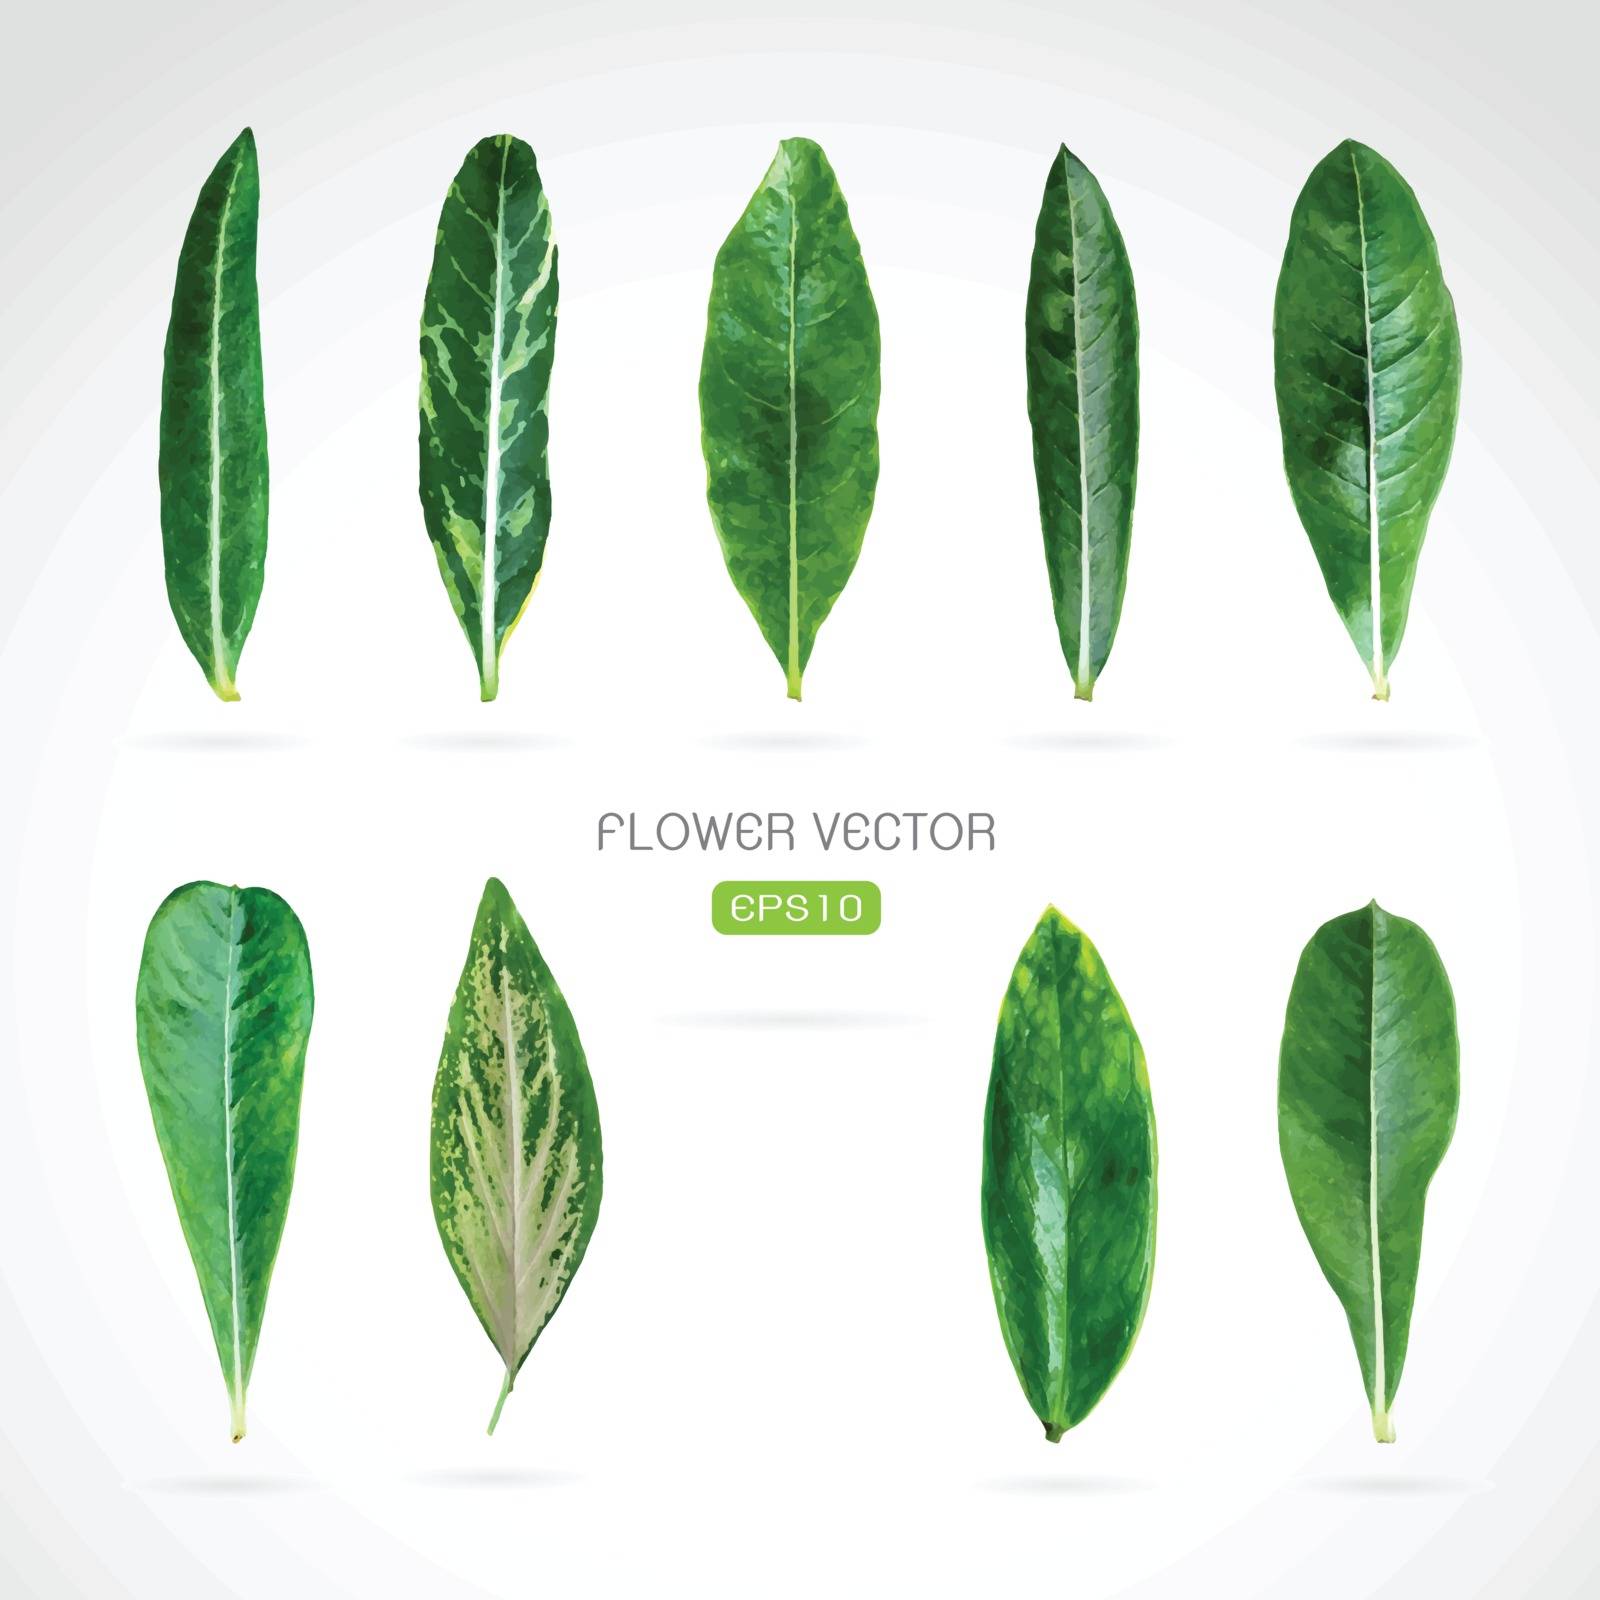 Vector image of leaves on white background